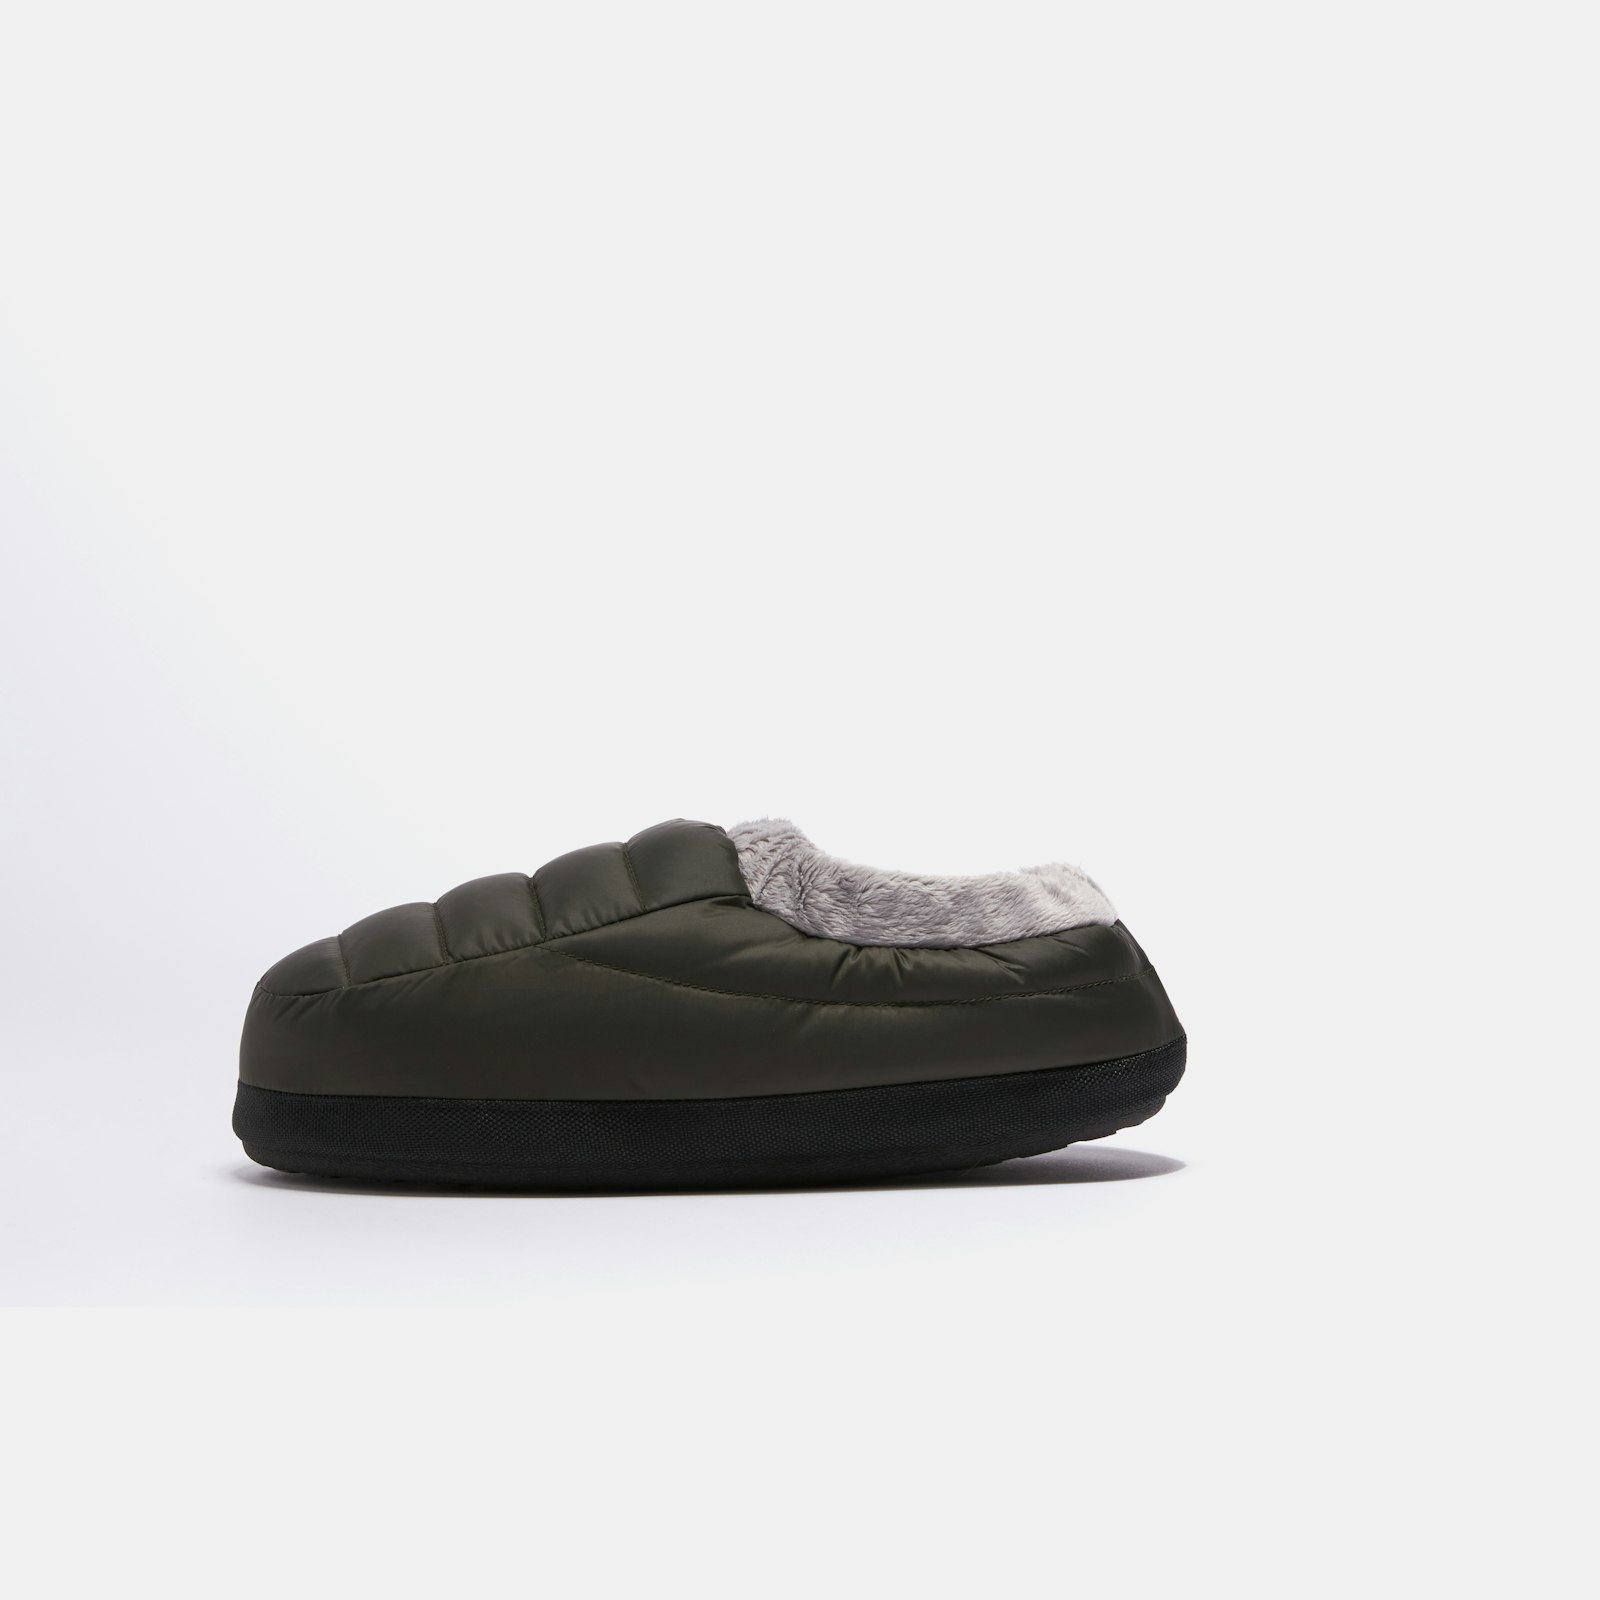 CampSlippers_Green_Small_Product_1x1_1110.jpg